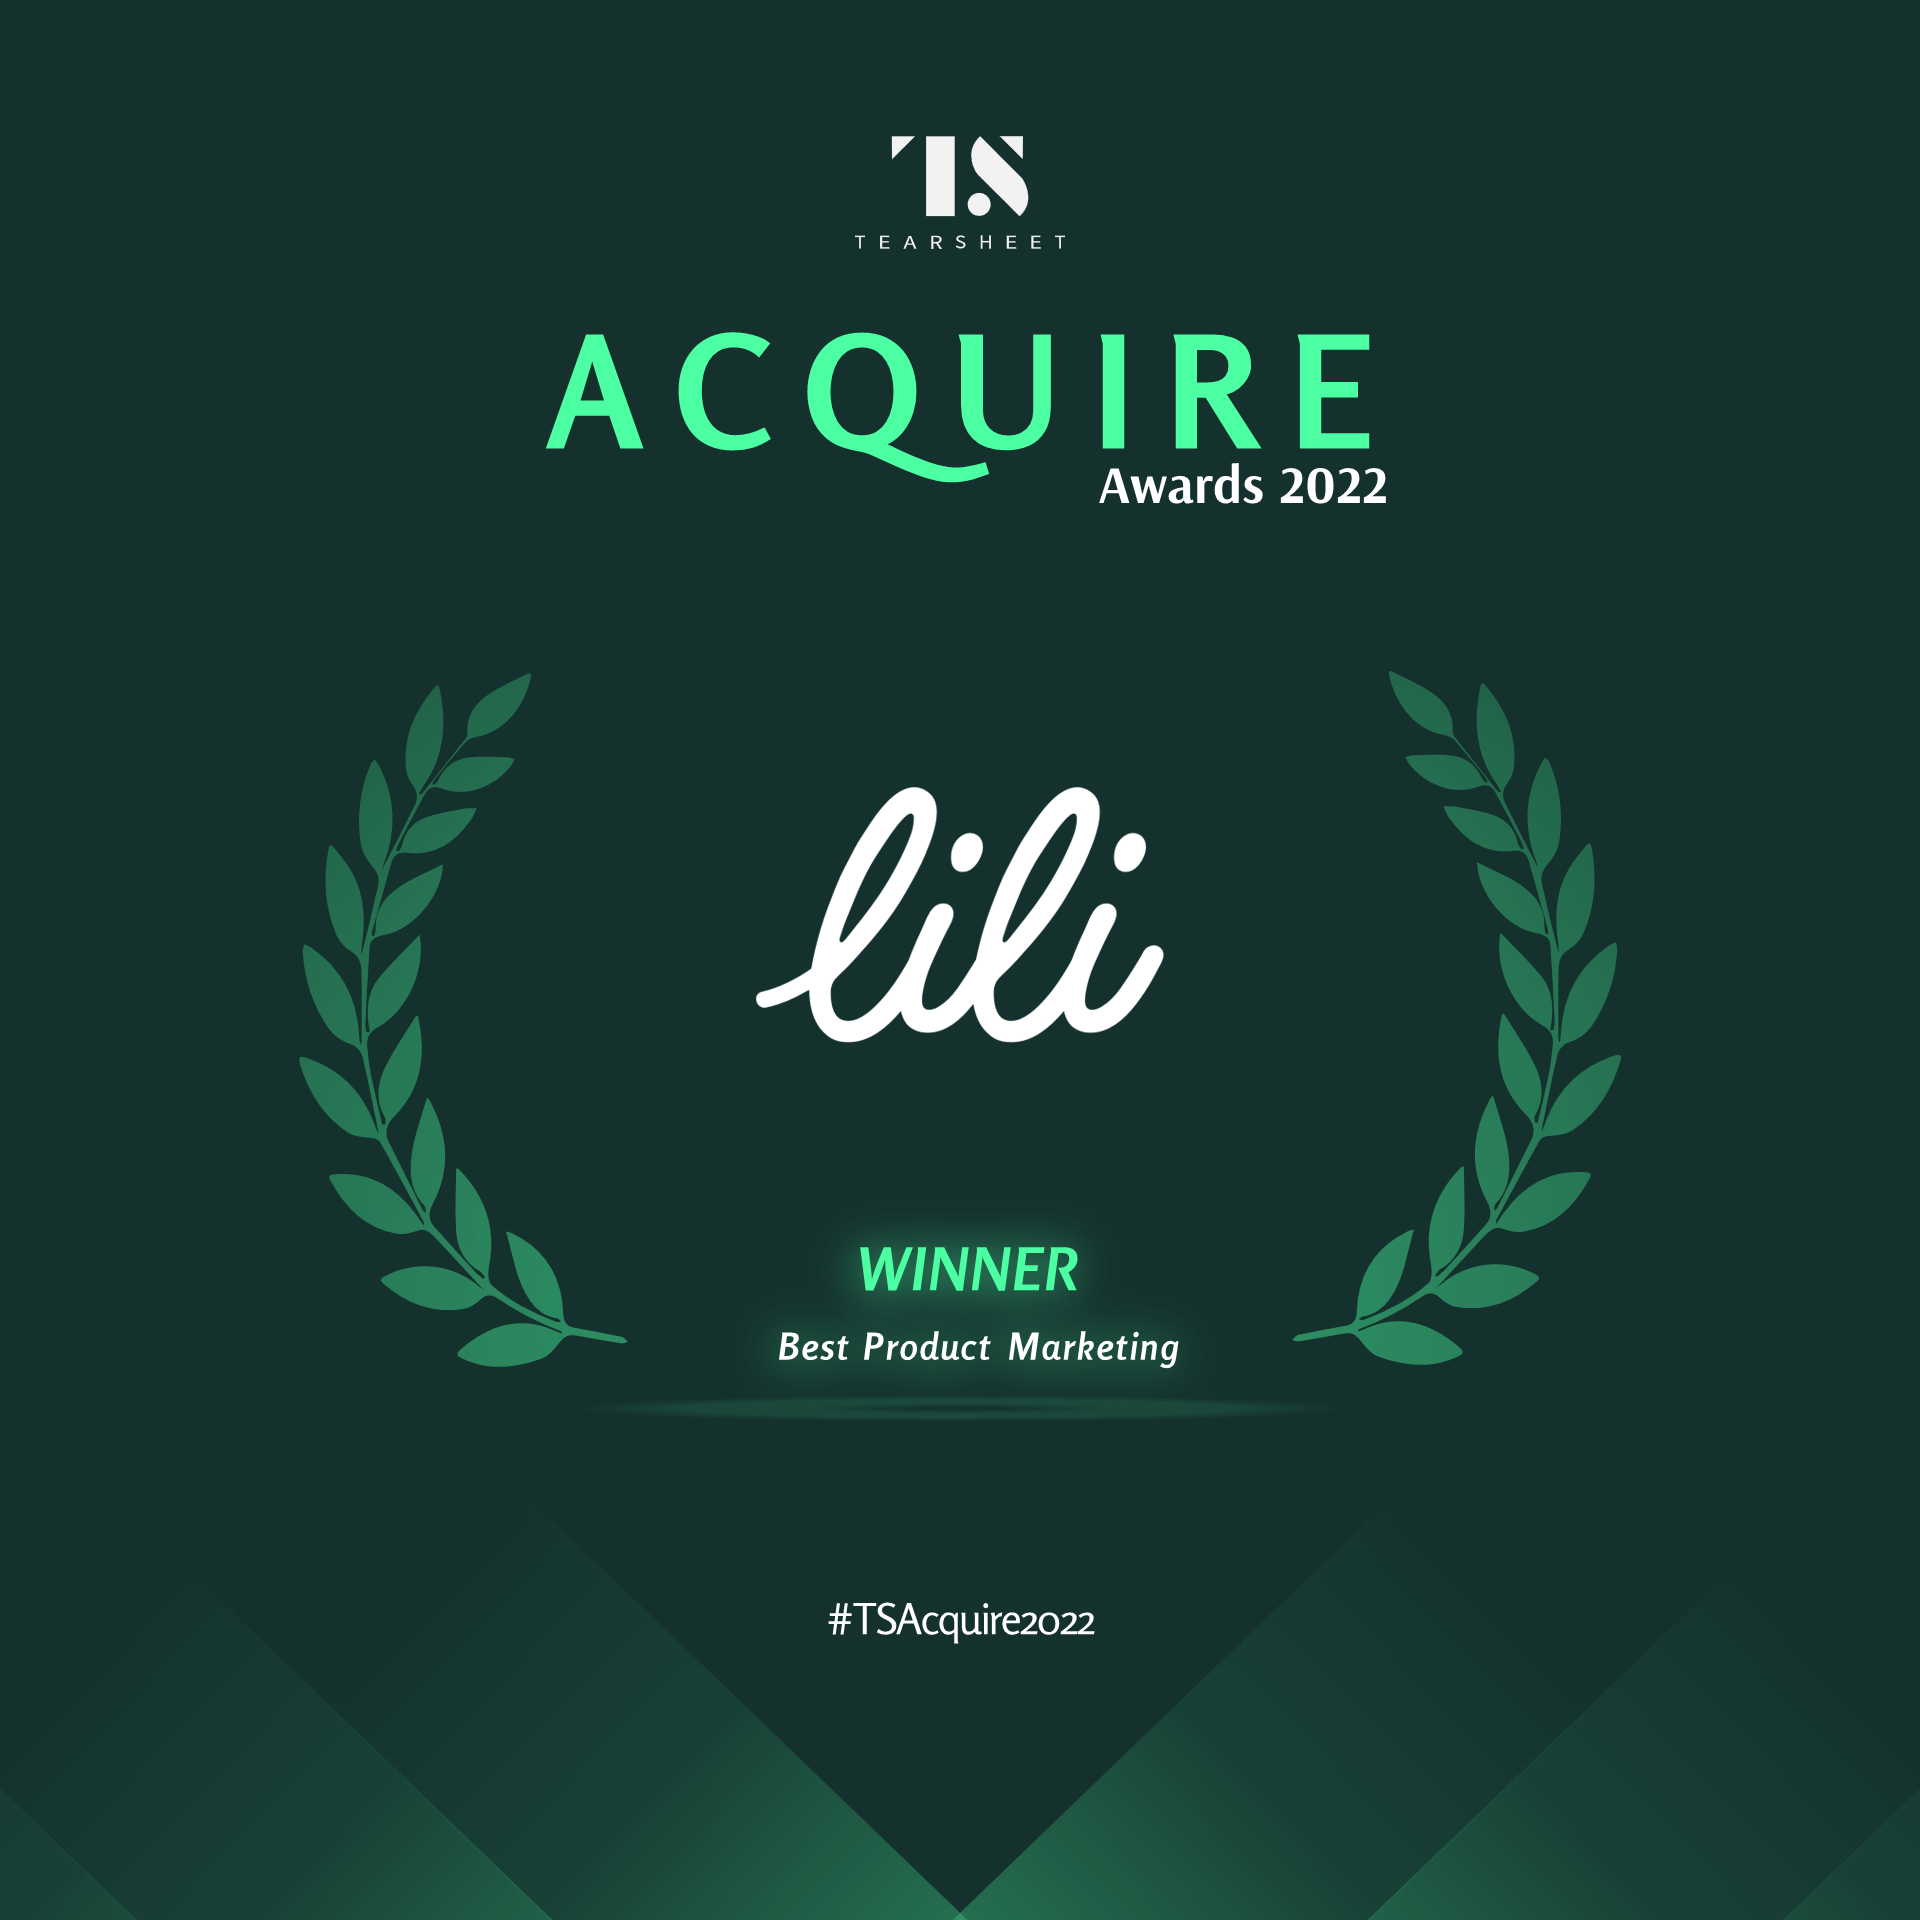 Acquire Awards 2022: Best Product Marketing